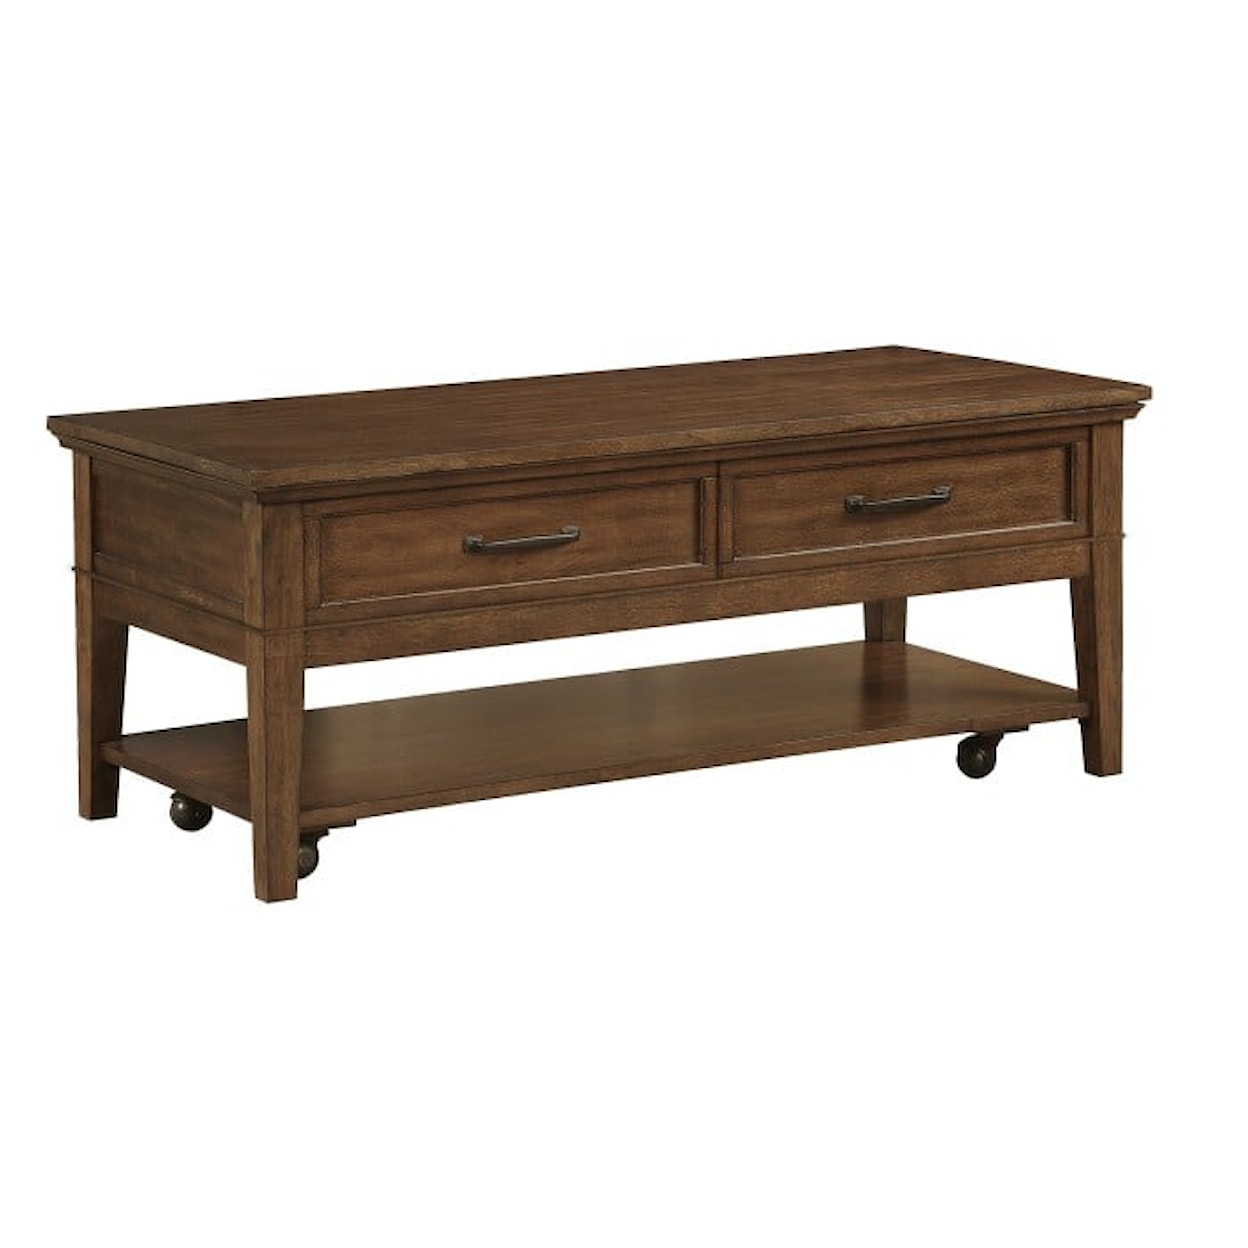 Homelegance Furniture Whitley Cocktail Table